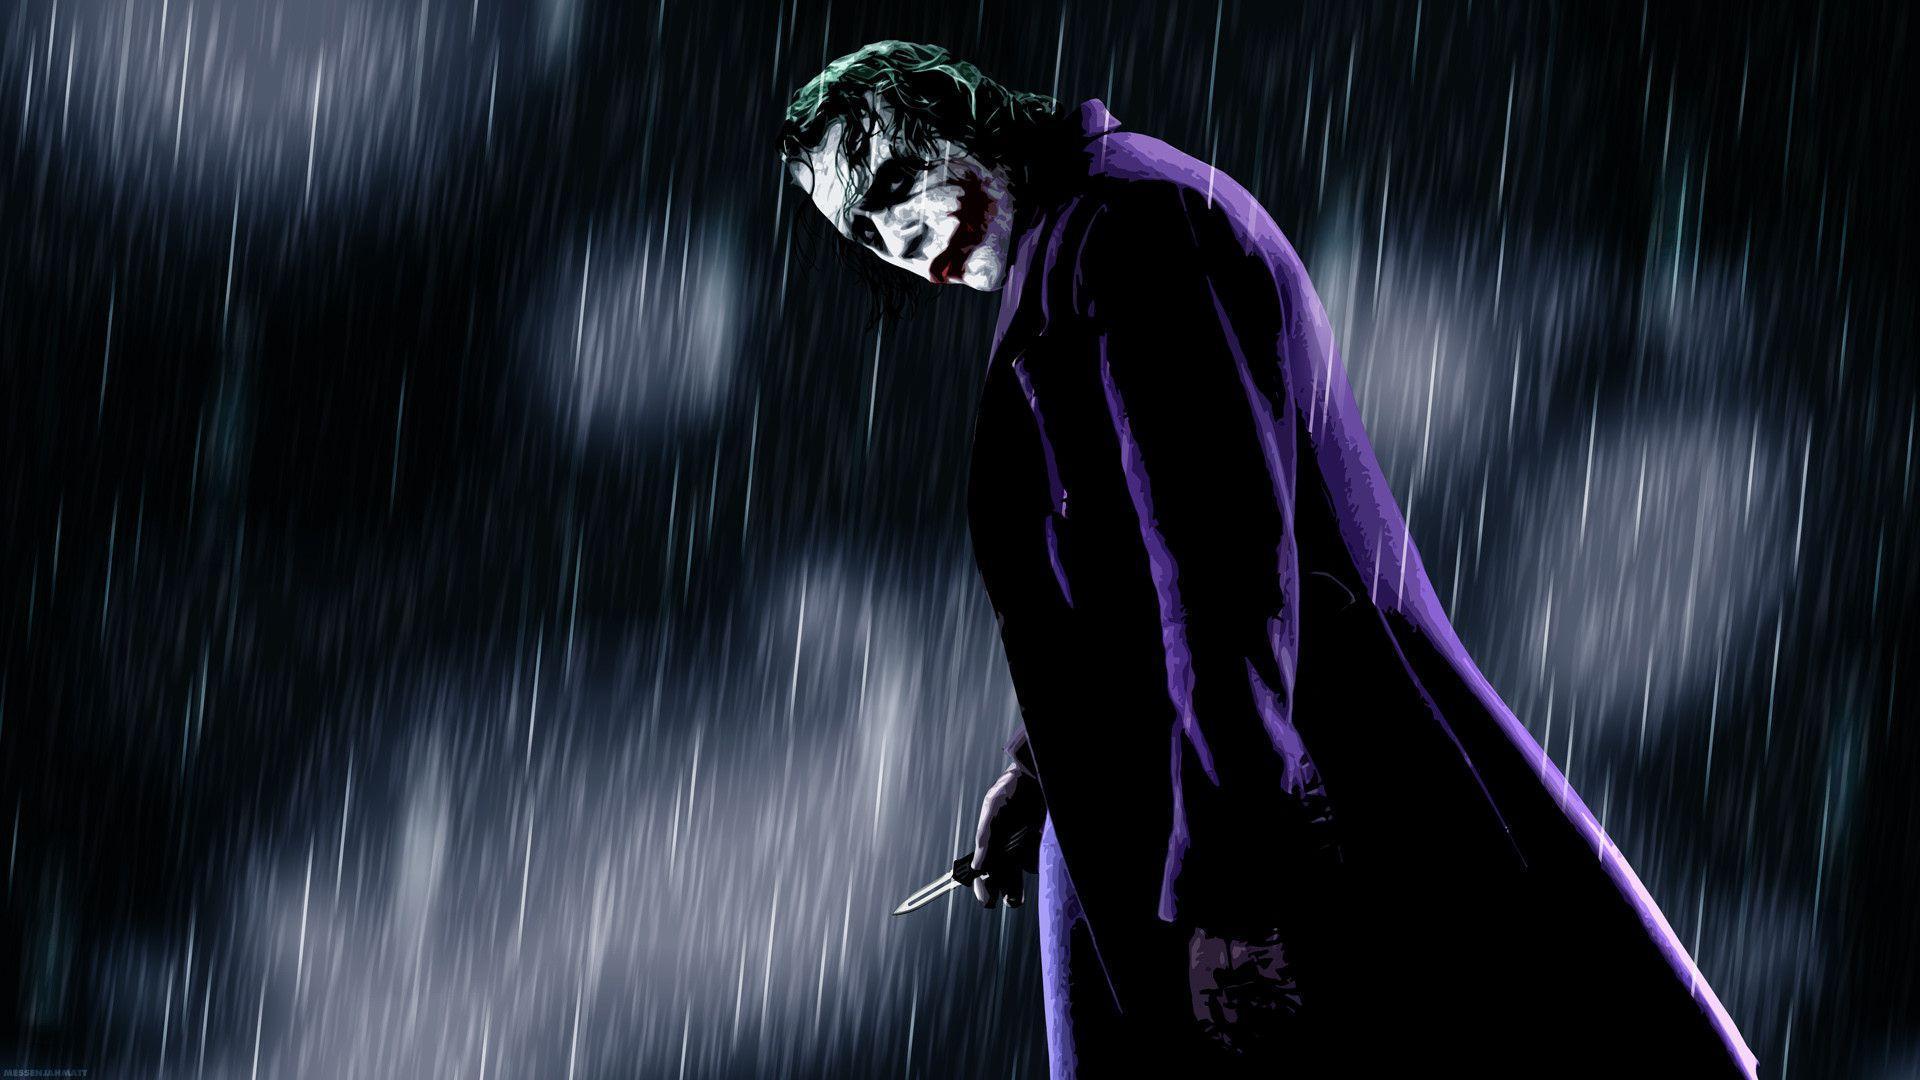 The Joker In The Rain Poster Wallpaper Wide or HD. Artistic